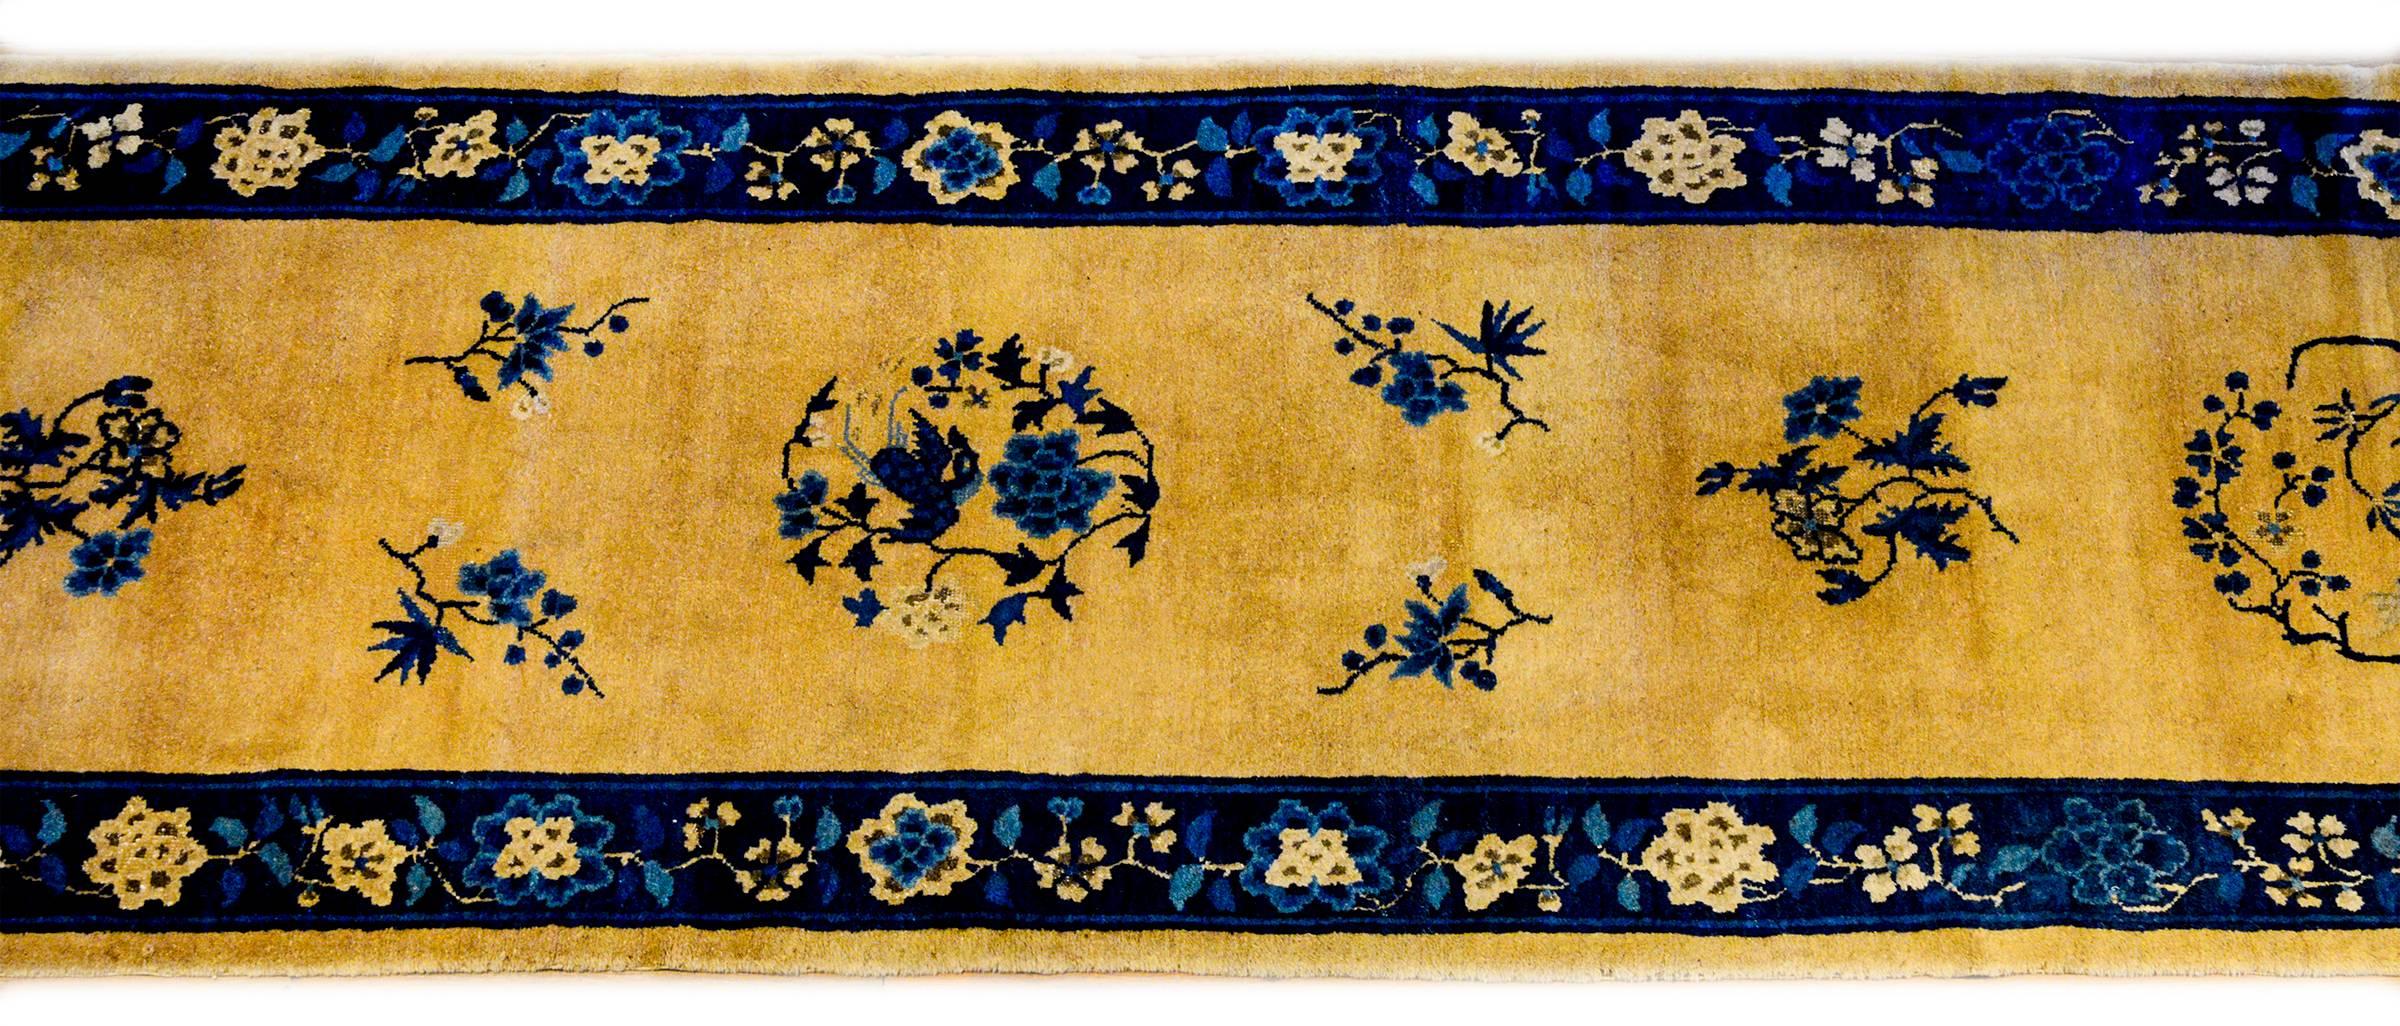 An exceptional early 20th century Chinese Art Deco runner with three floral medallions amidst a field of flowers woven in light and dark indigo on a natural undyed wool background. The borer is complementary with large auspicious flowers woven in